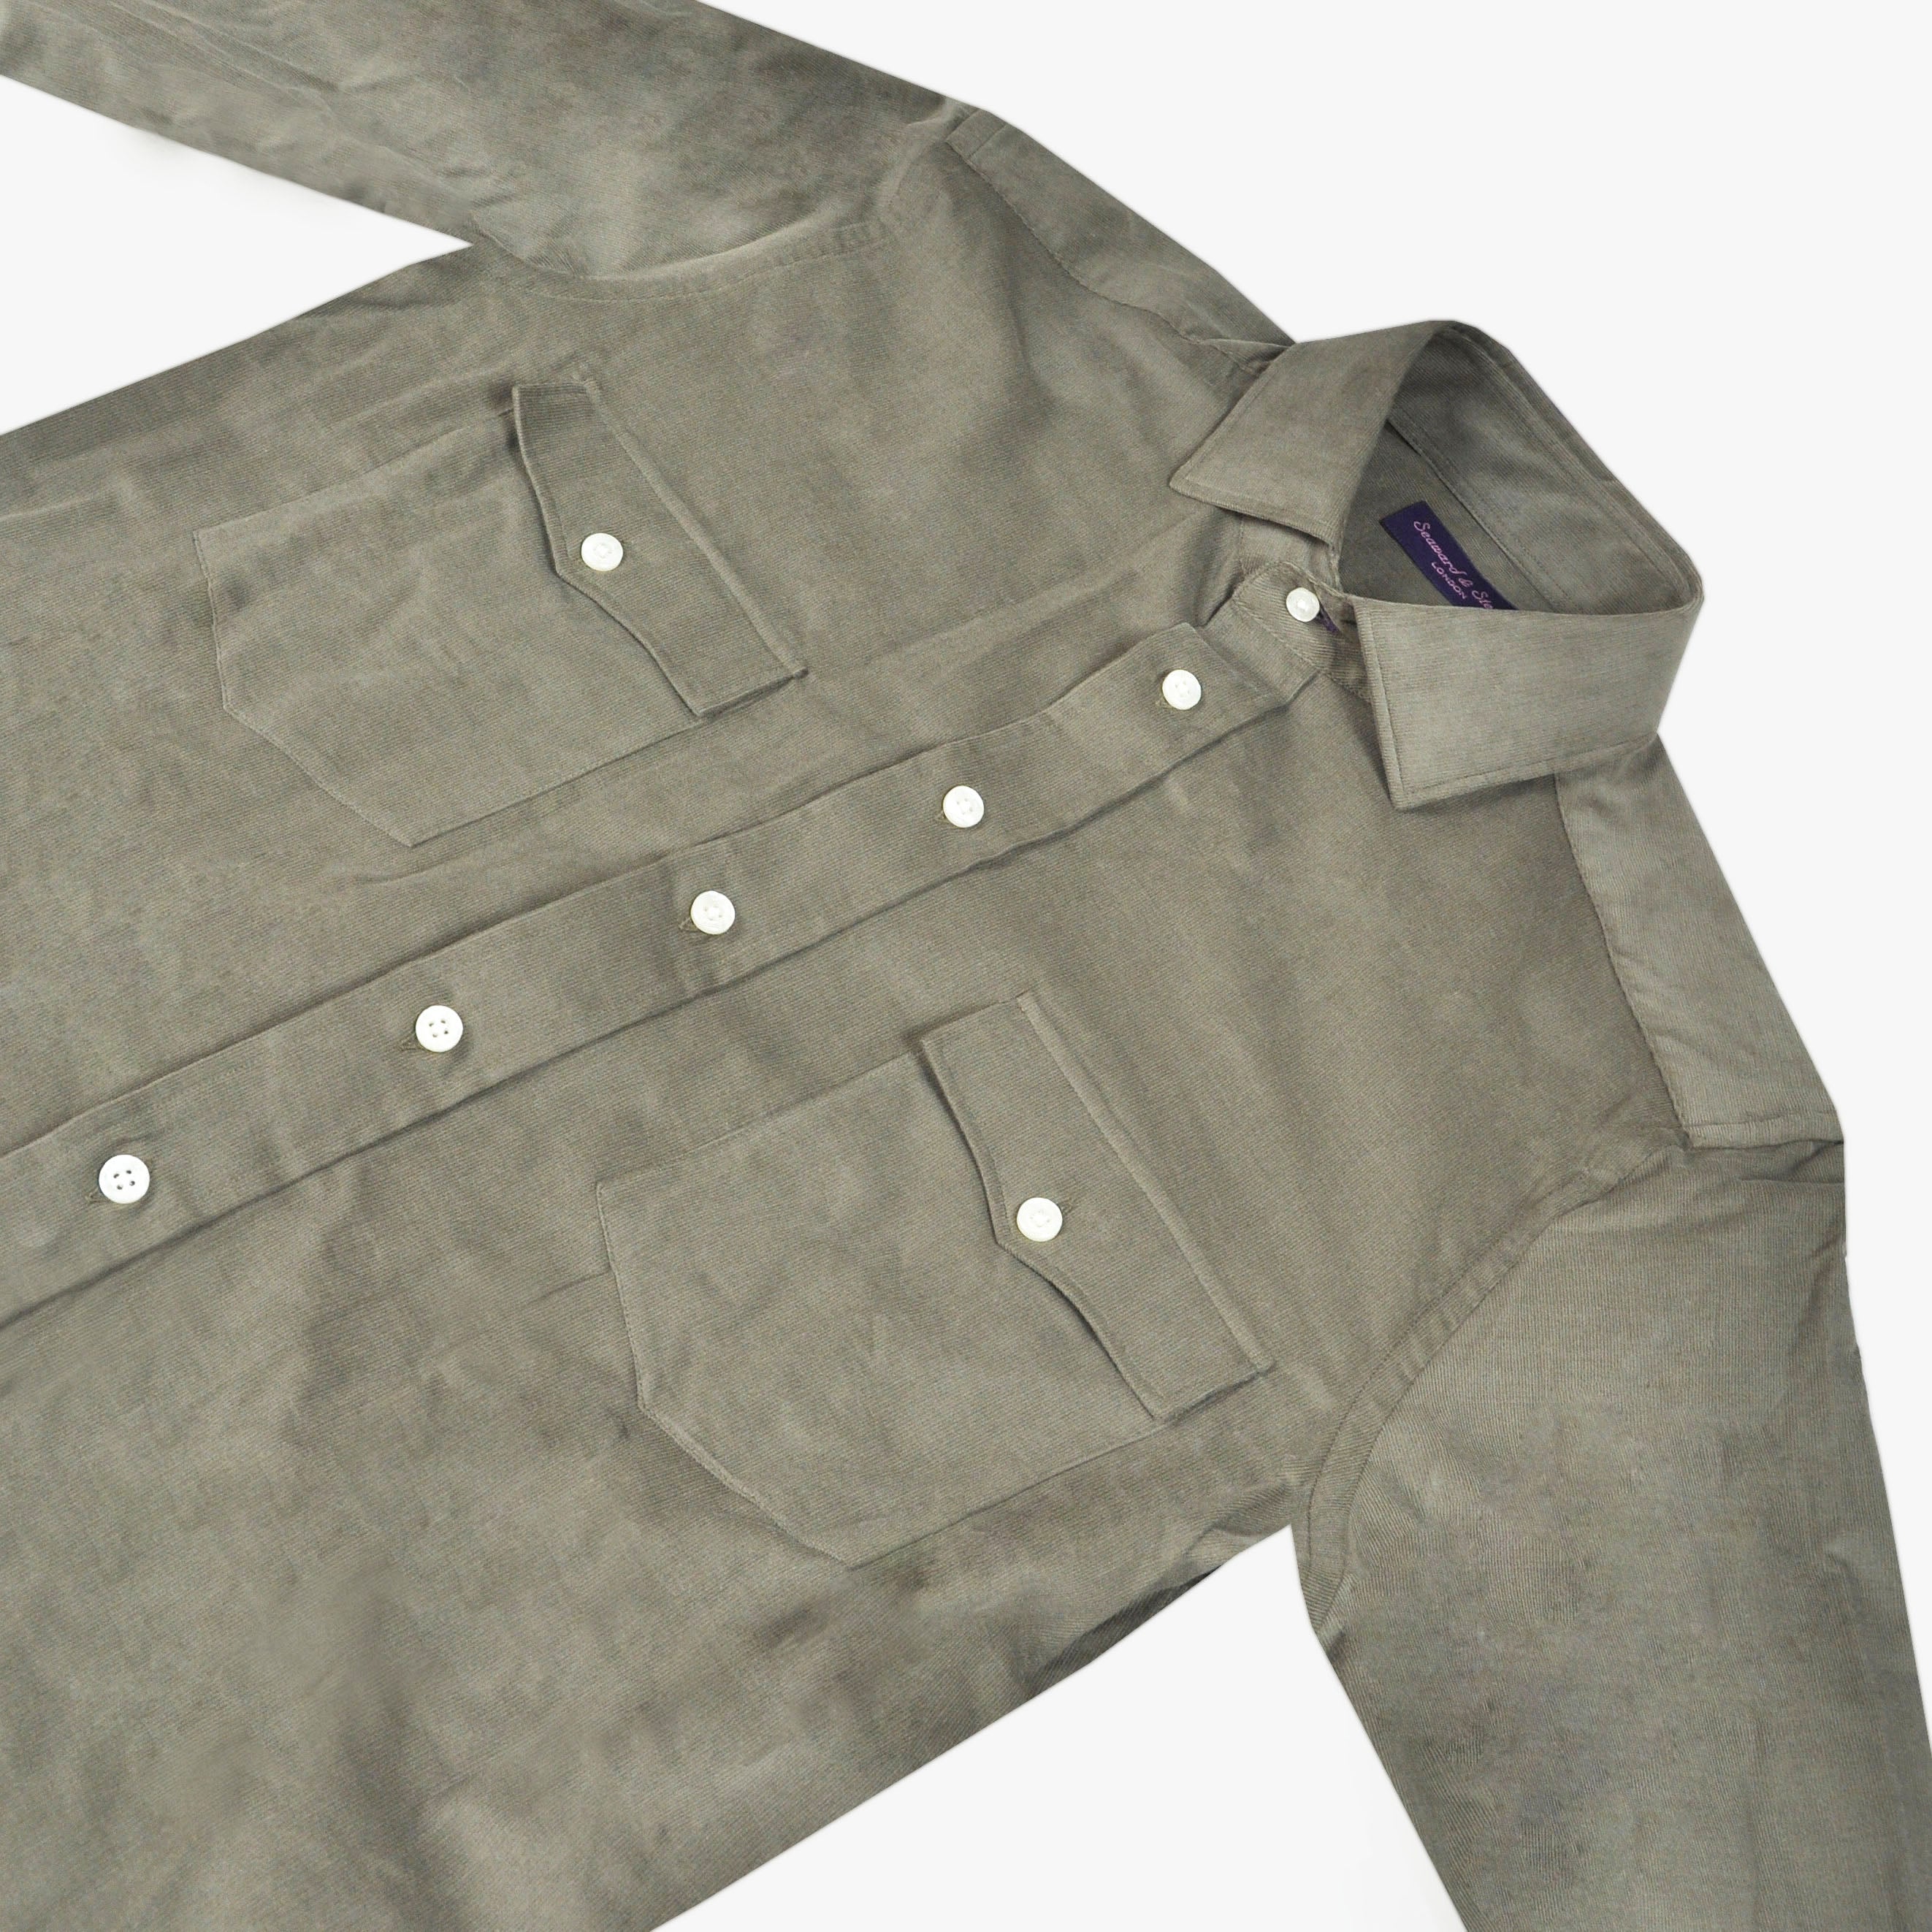 Fine Corduroy Spread Collar Shirt with Double Breast Pockets in Olive